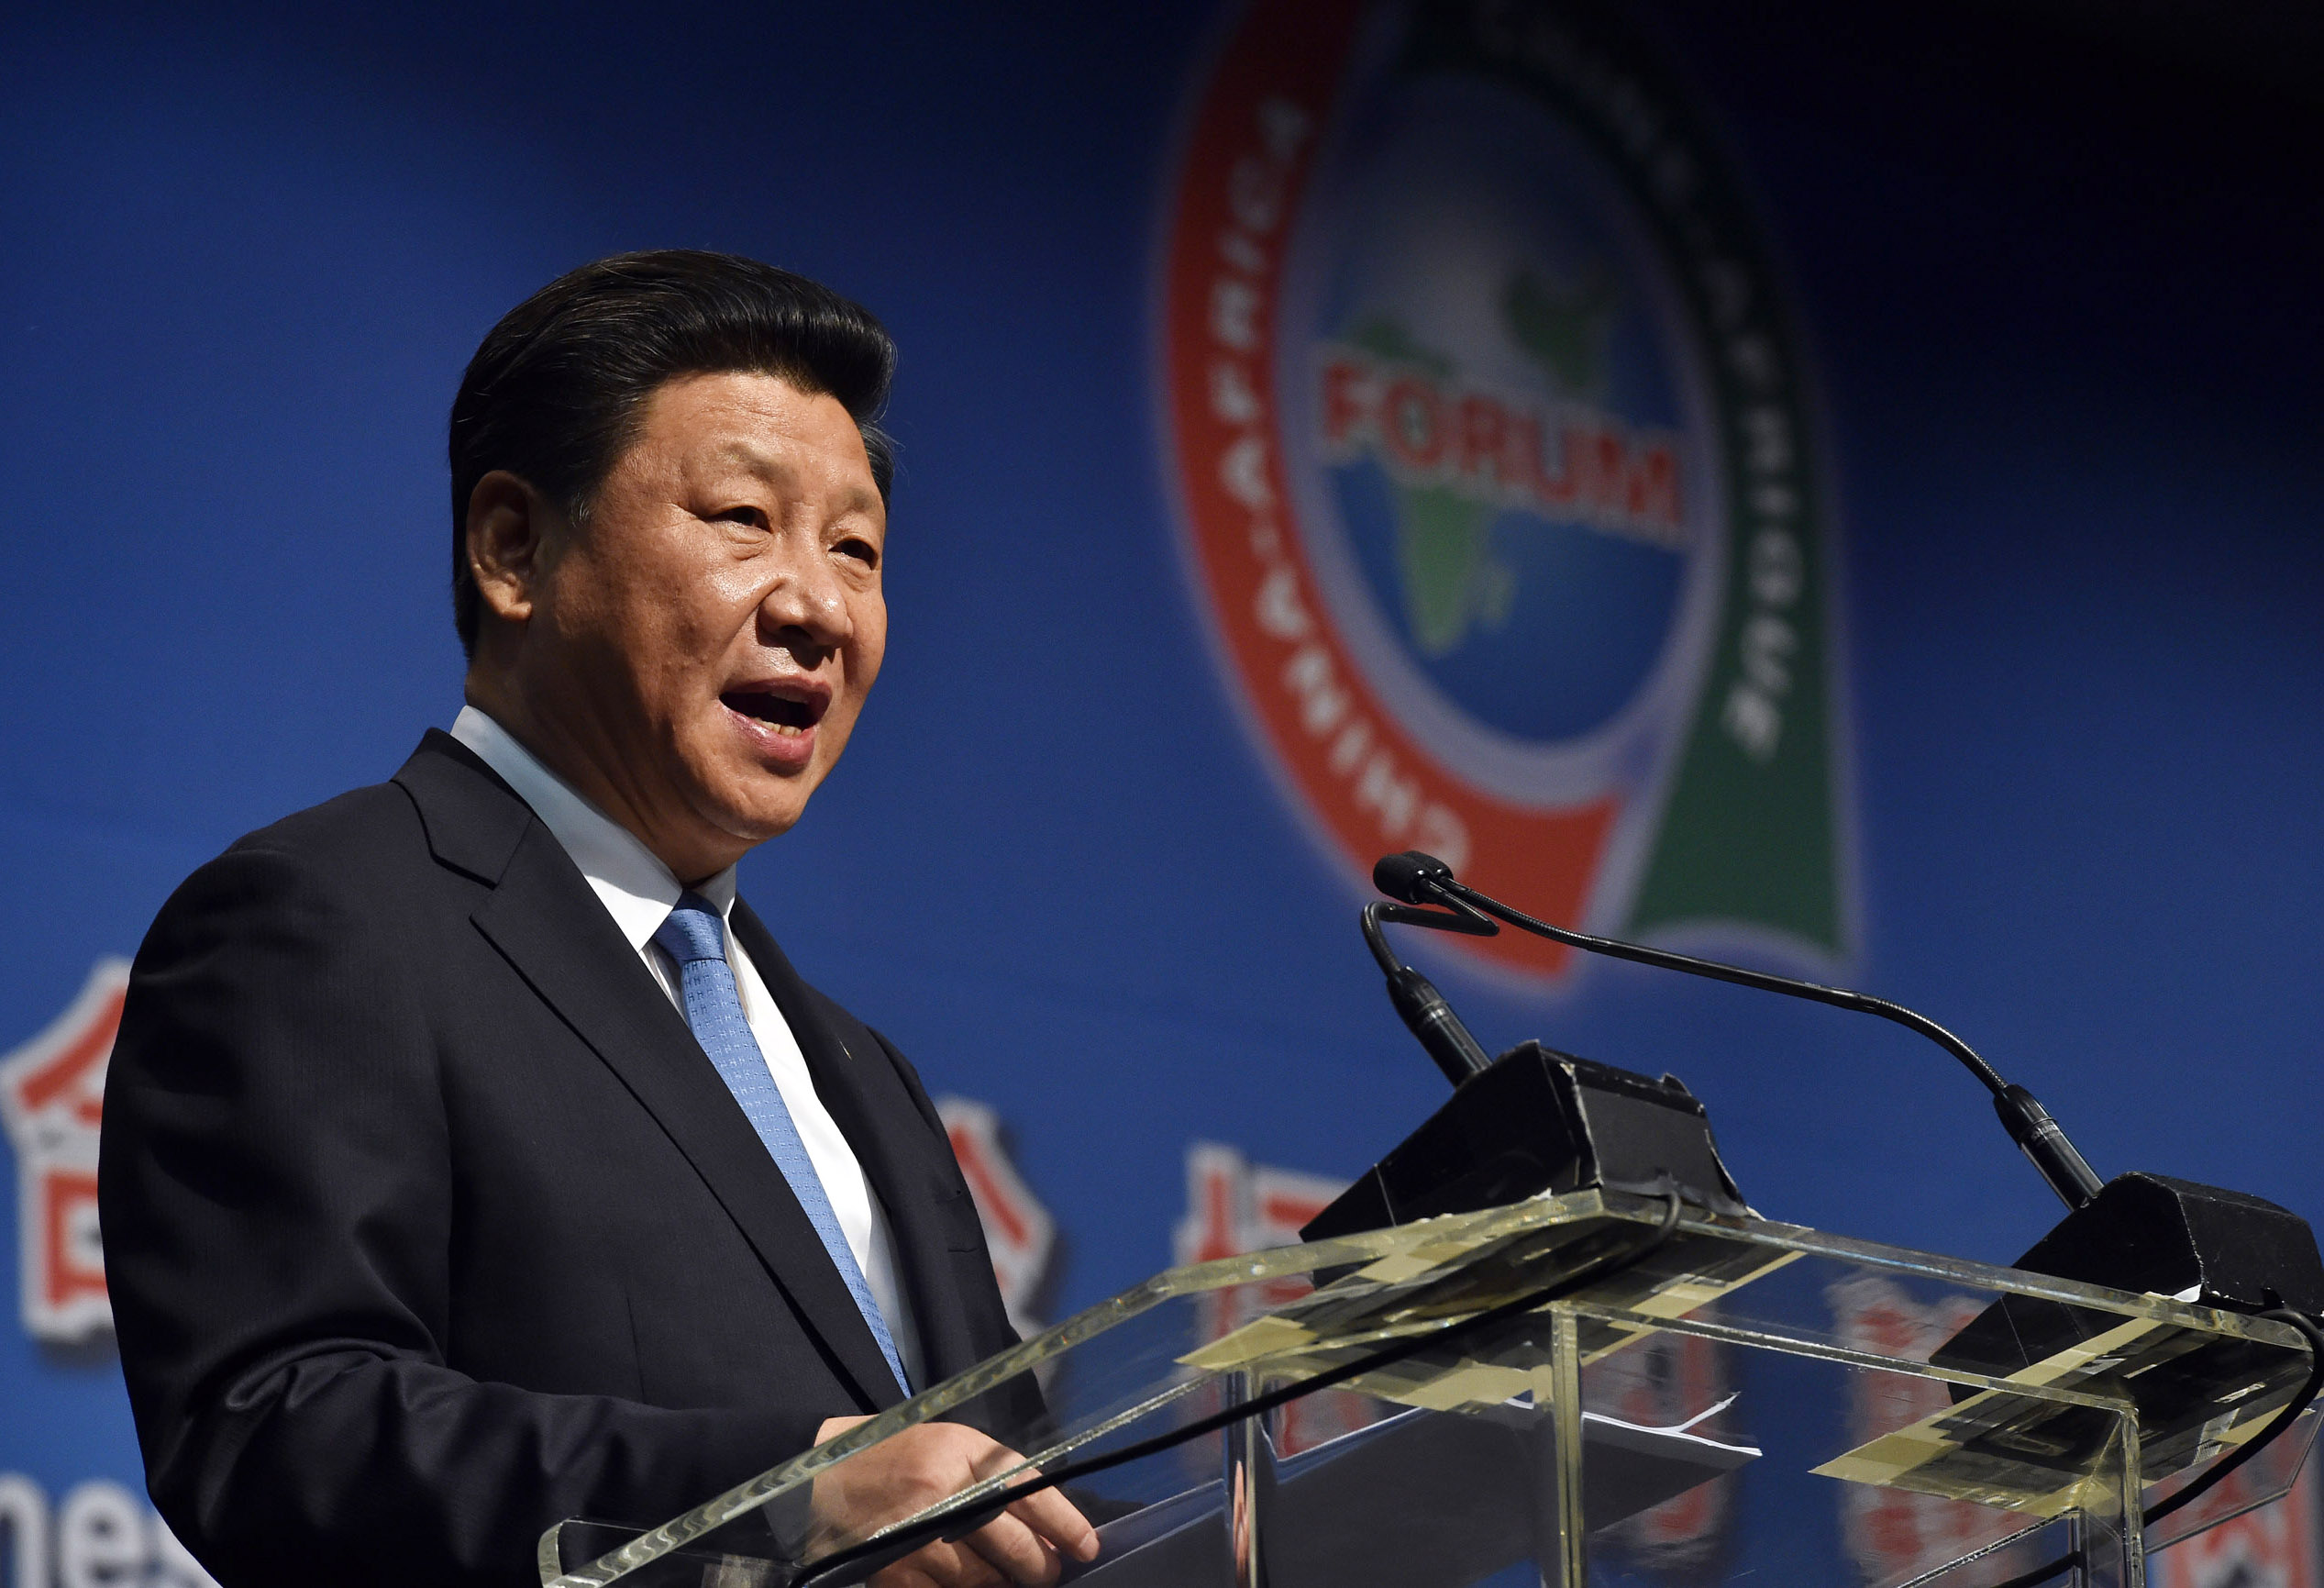 A handout picture provided by the South African Government Communication and Information System (GCIS) shows Chinese President Xi Jinping addressing delegates at the opening of the Forum on China-Africa Co-operation (Focac) Summit in Johannesburg, South Africa, Dec. 2015. (ELMOND JIYANE/GCIS/EPA)